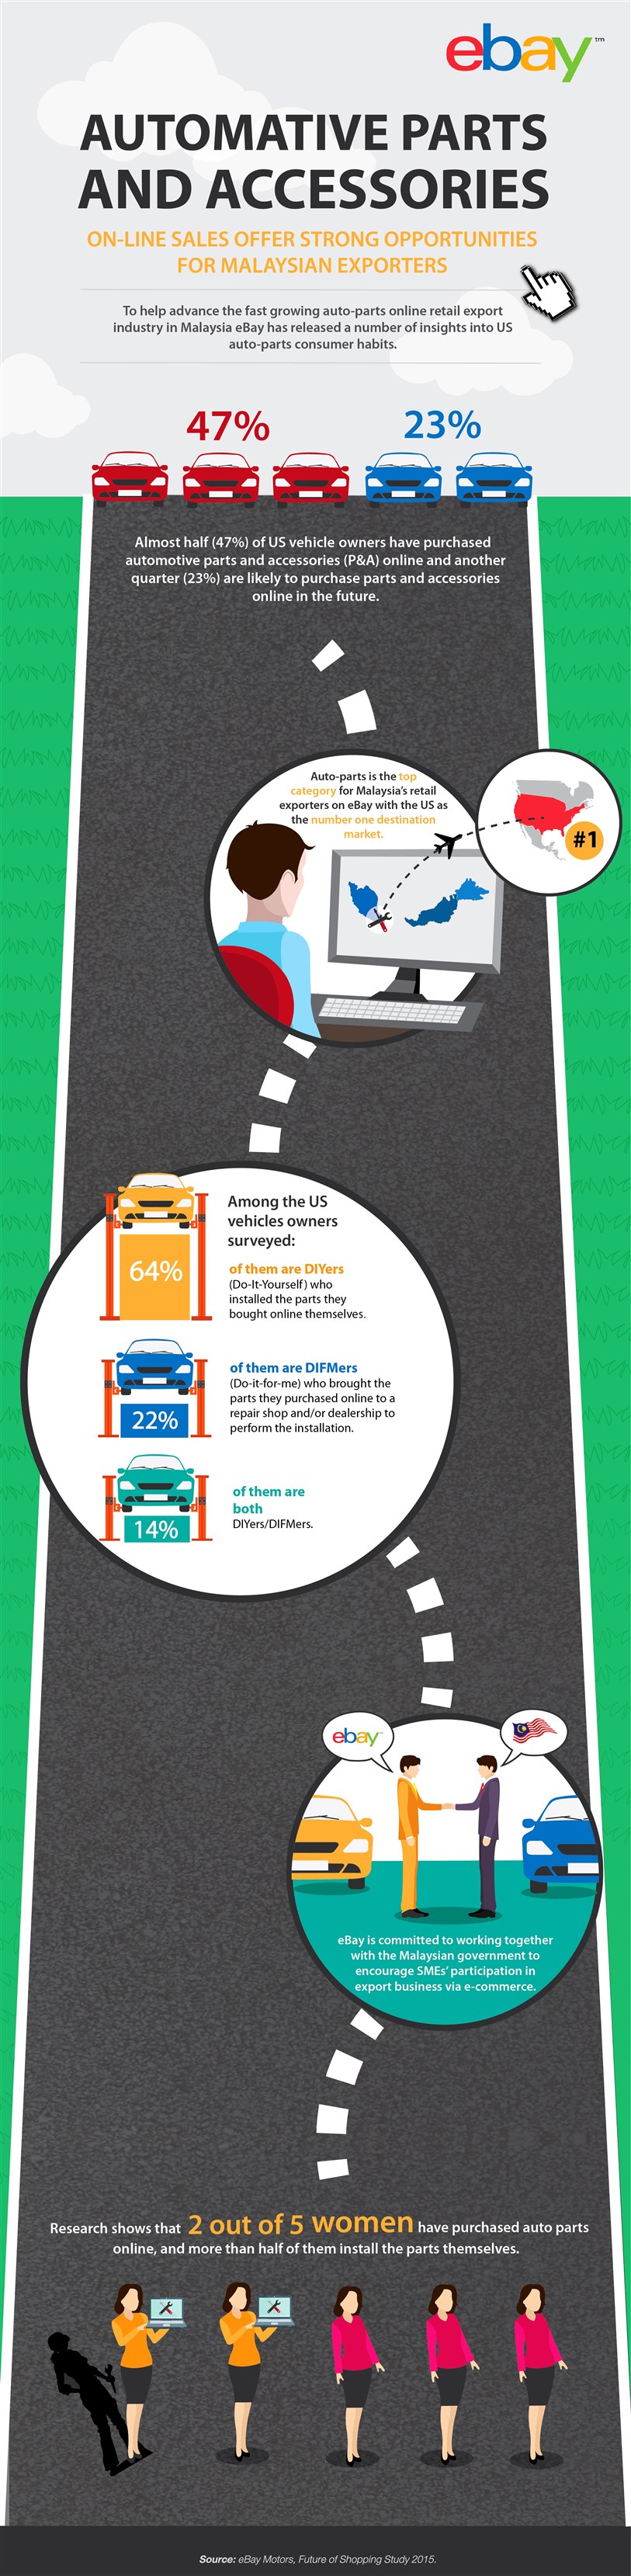 ebay_infographic_Malaysia Auto-Parts Industry